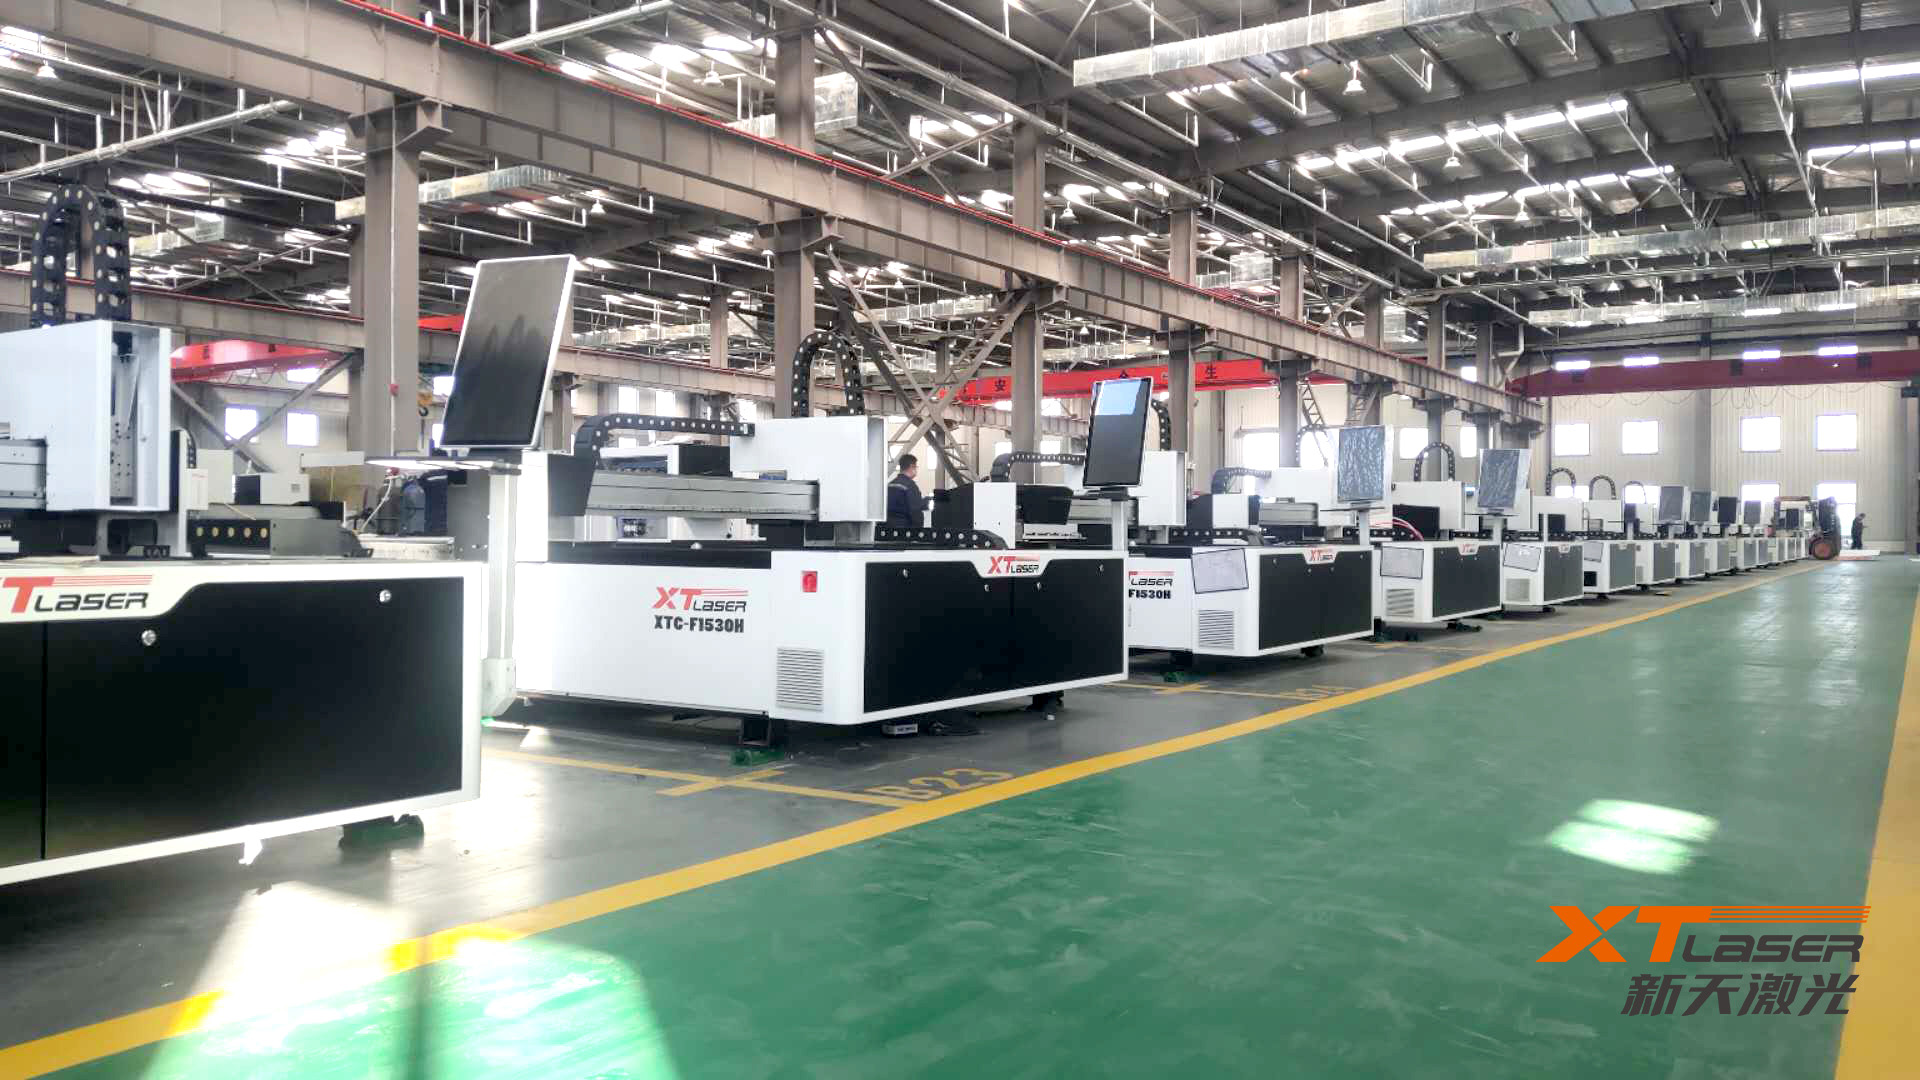 Which brands of fiber laser cutting machines are good? Laser cutting machine brands are recommended throughout the network